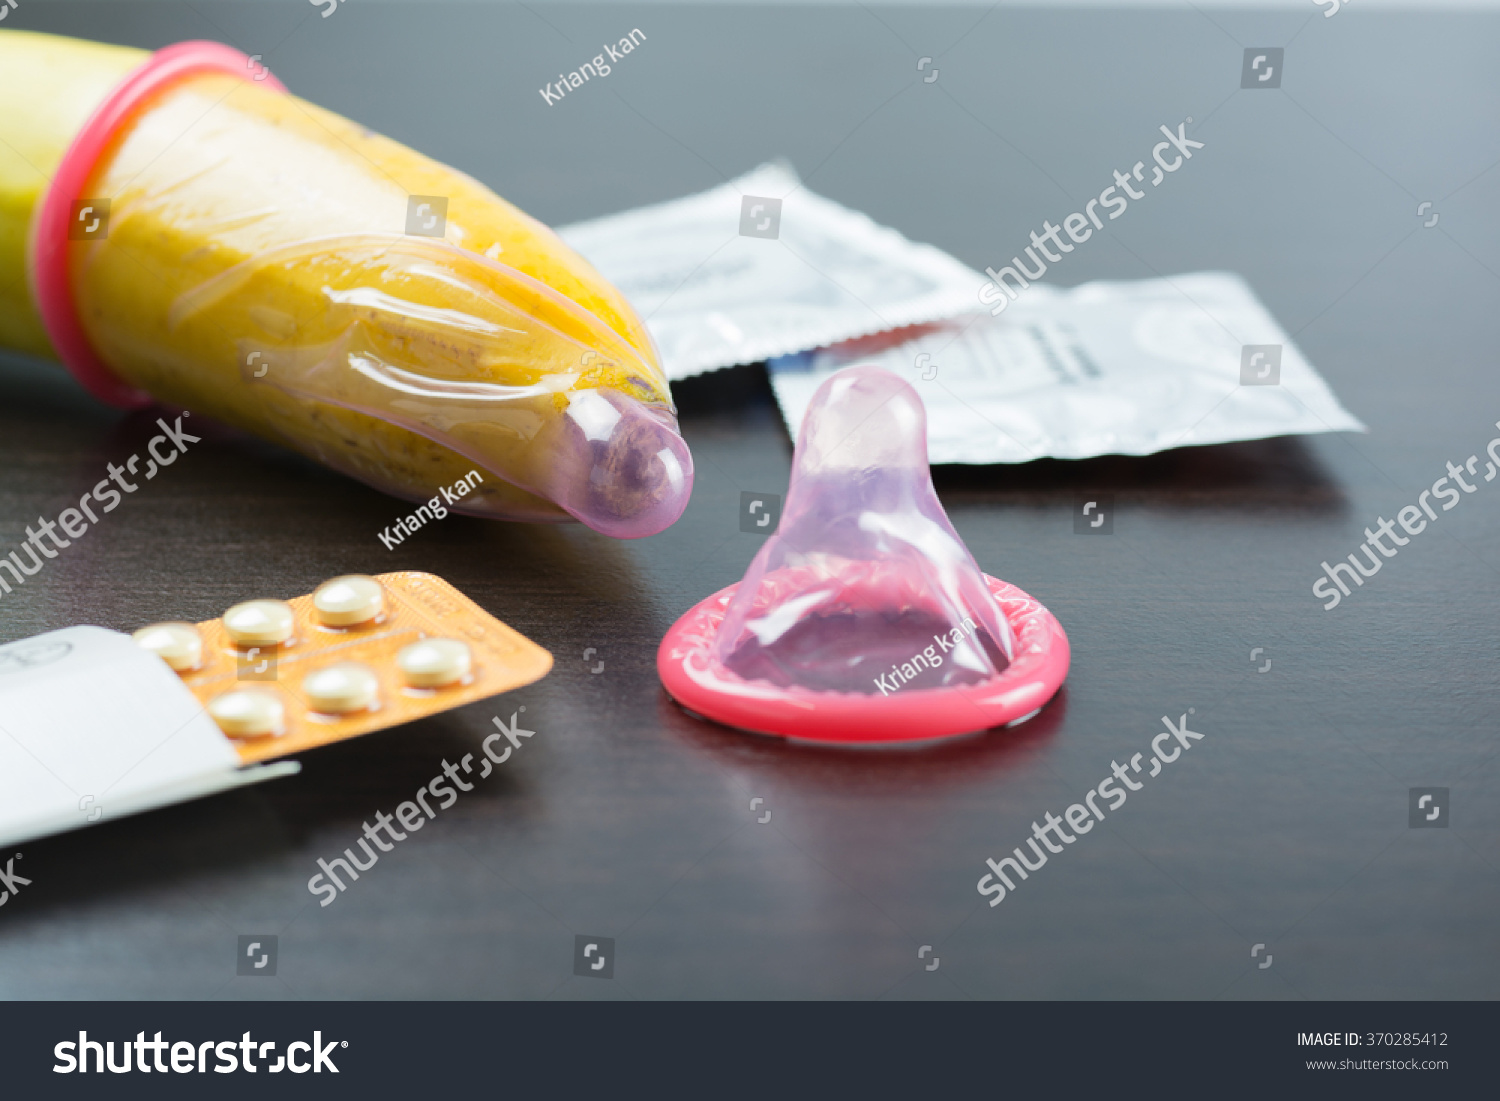 Condom With Banana And Contraception On Wood Background Save Sex And